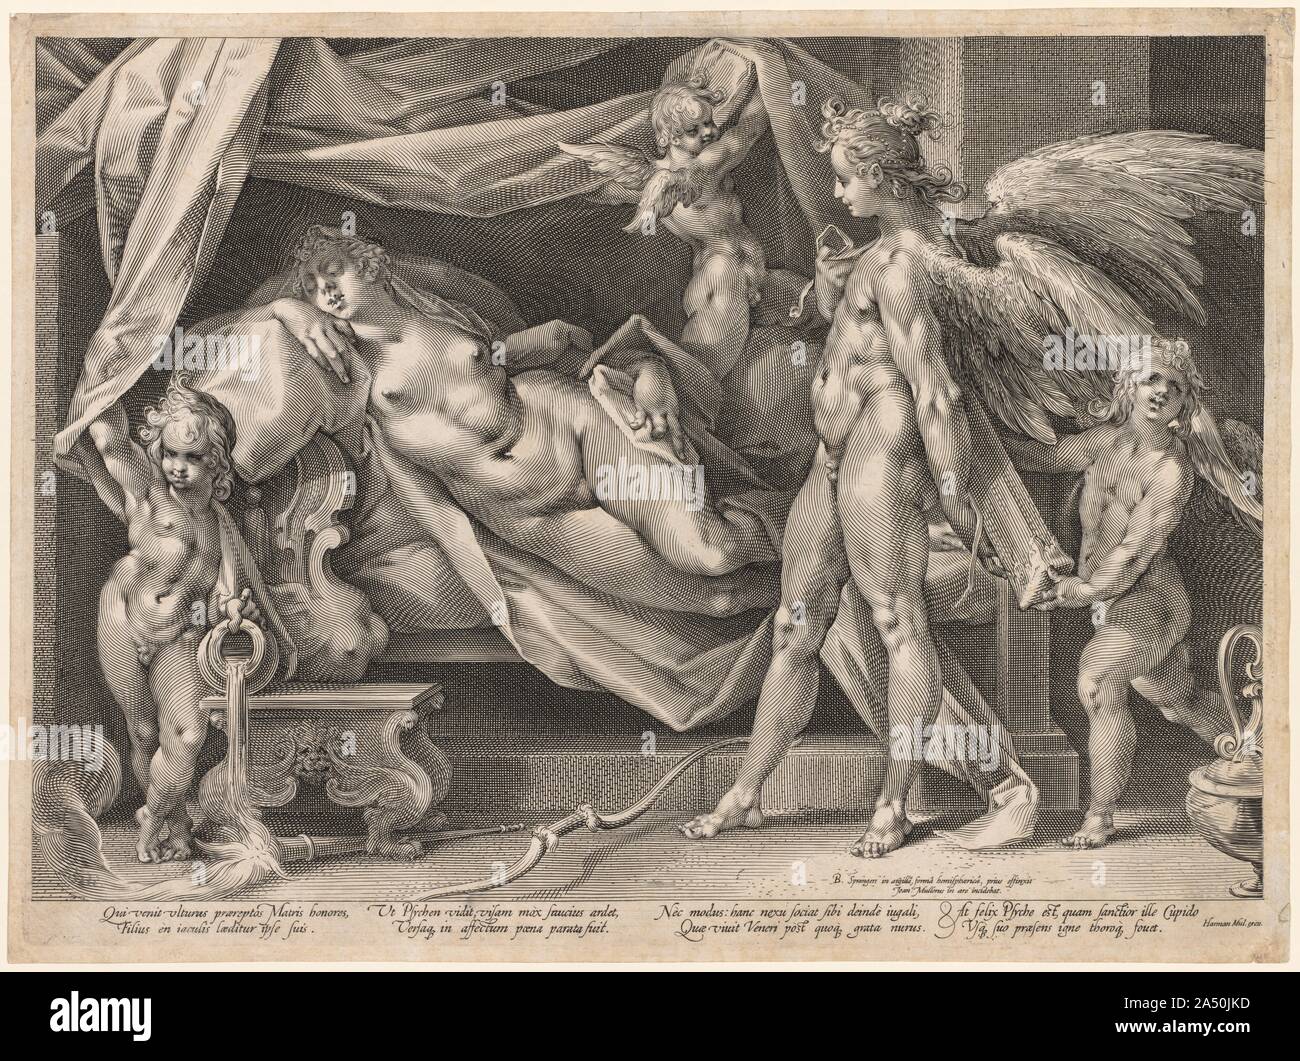 Cupid and Psyche, c. 1600. M&#xfc;ller adopted Goltzius's engraving style of a dense network of swelling and tapering lines. He sometimes made prints after works by Bartholomeus Spranger (1546-about 1611), another exponent of the Mannerist style and court painter to the Holy Roman Emperor Rudolph II (1576-1612) in Prague. Stock Photo